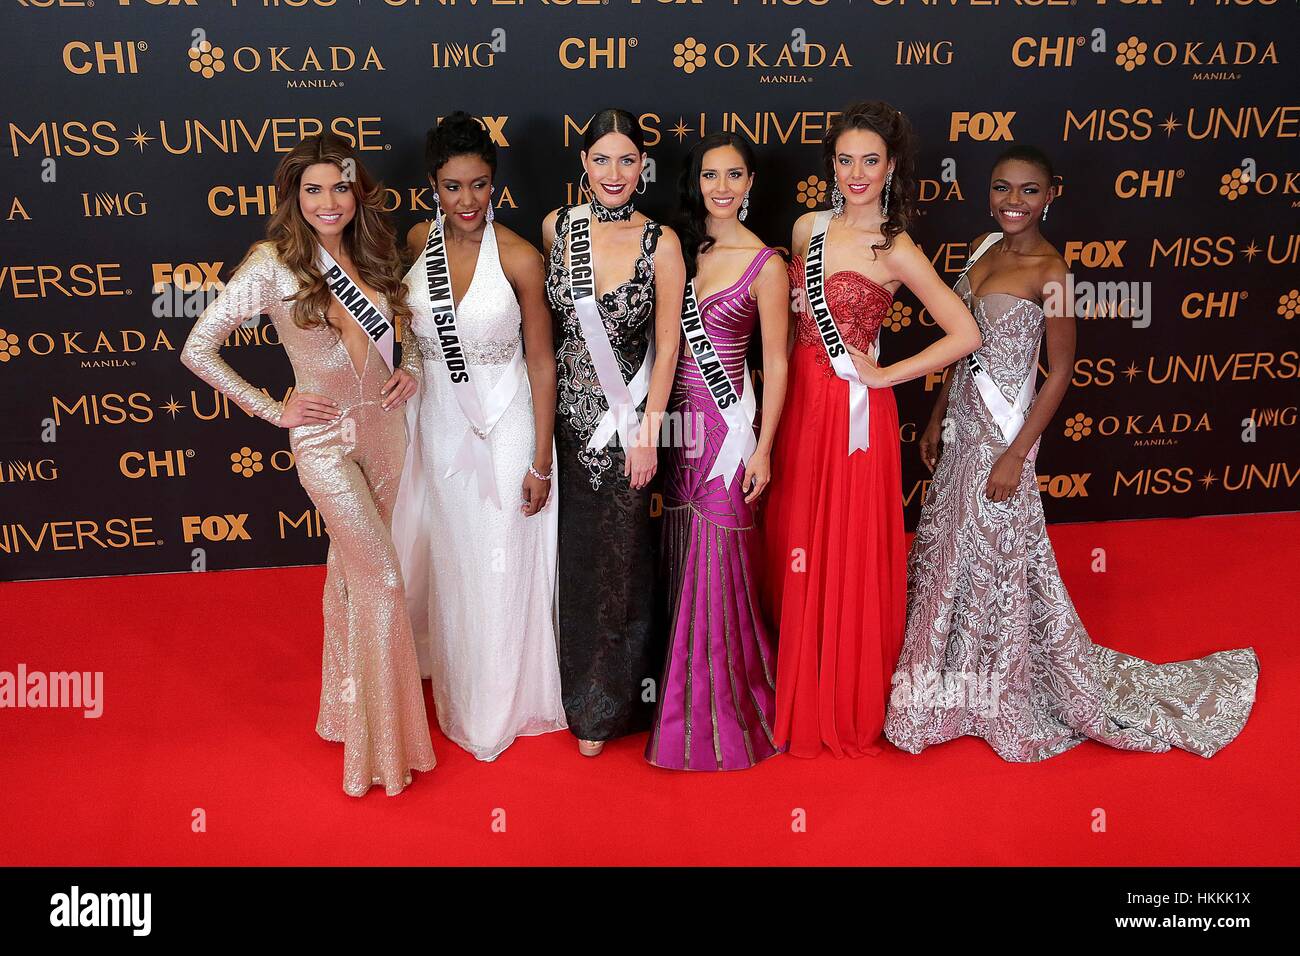 Pasay City, Philippines. 29th Jan, 2017. Miss Universe candidates pose for photos during the Miss Universe red carpet event in Pasay City, the Philippines, January 29, 2017. Credit: Rouelle Umali/Xinhua/Alamy Live News Stock Photo